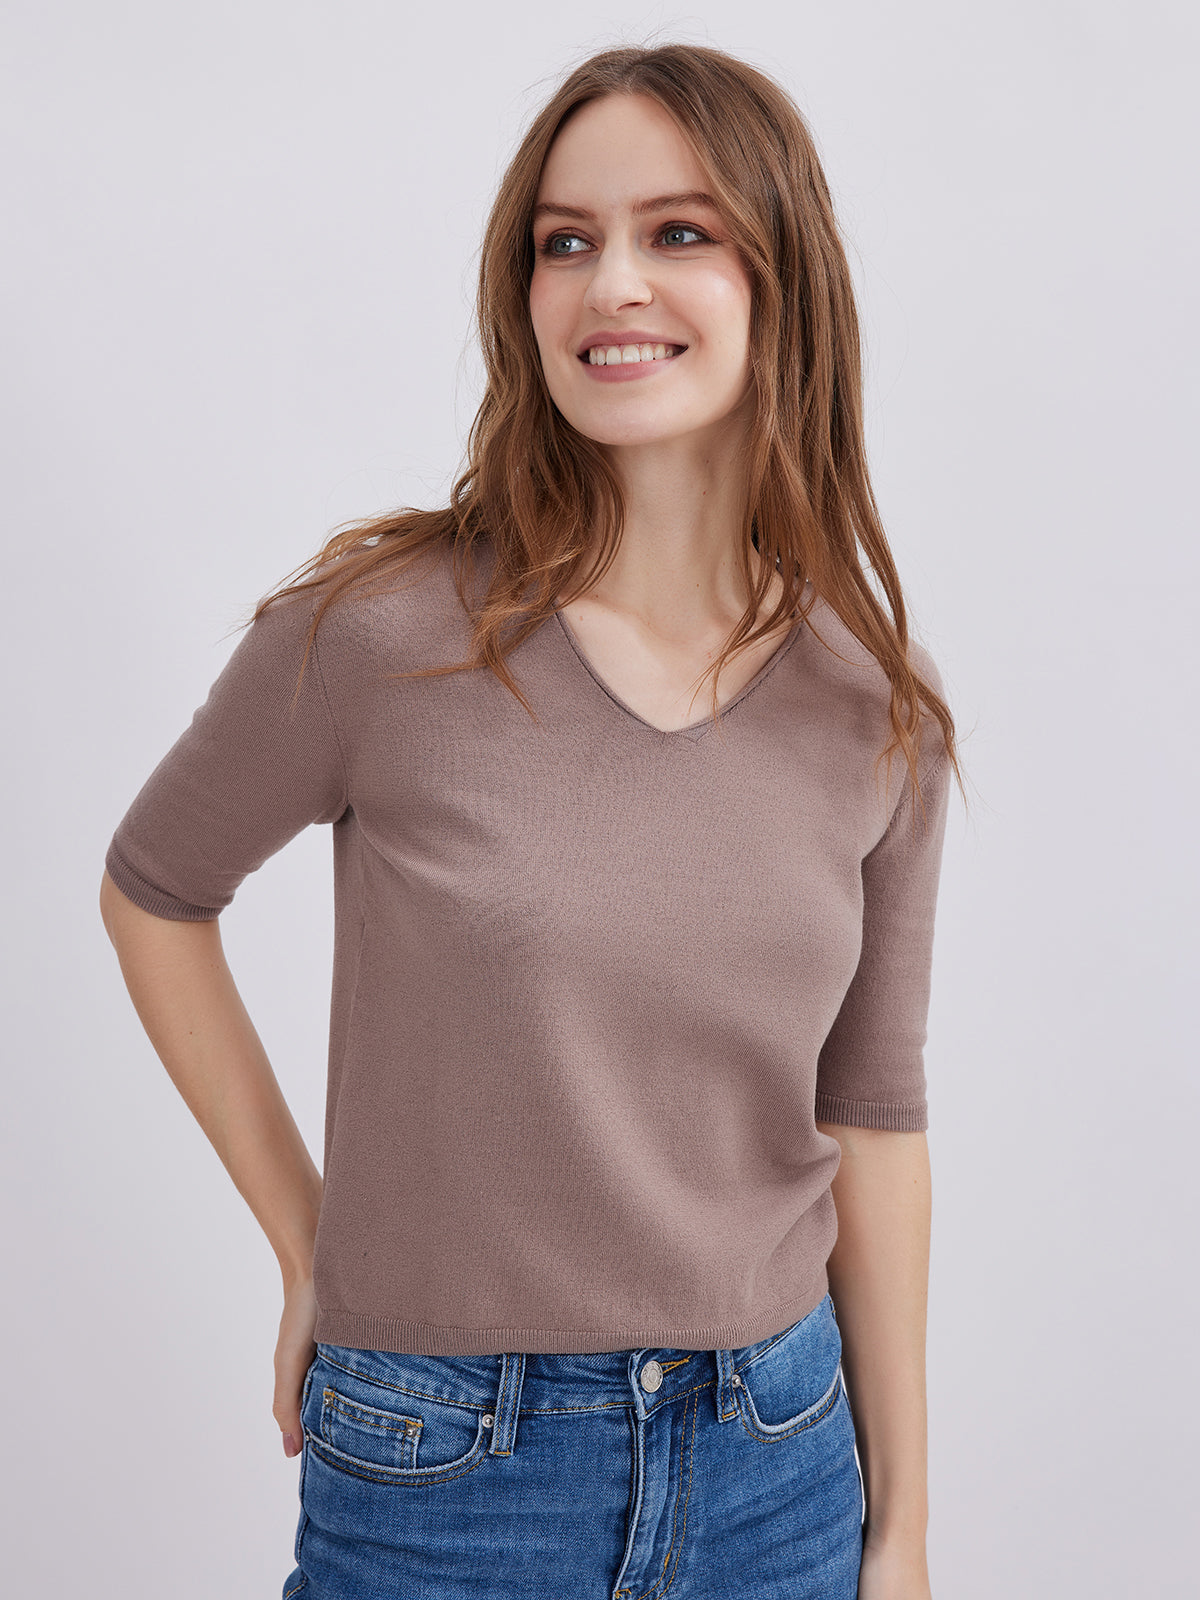 Brown Asobio Stylish and Cozy Knitwear for Women